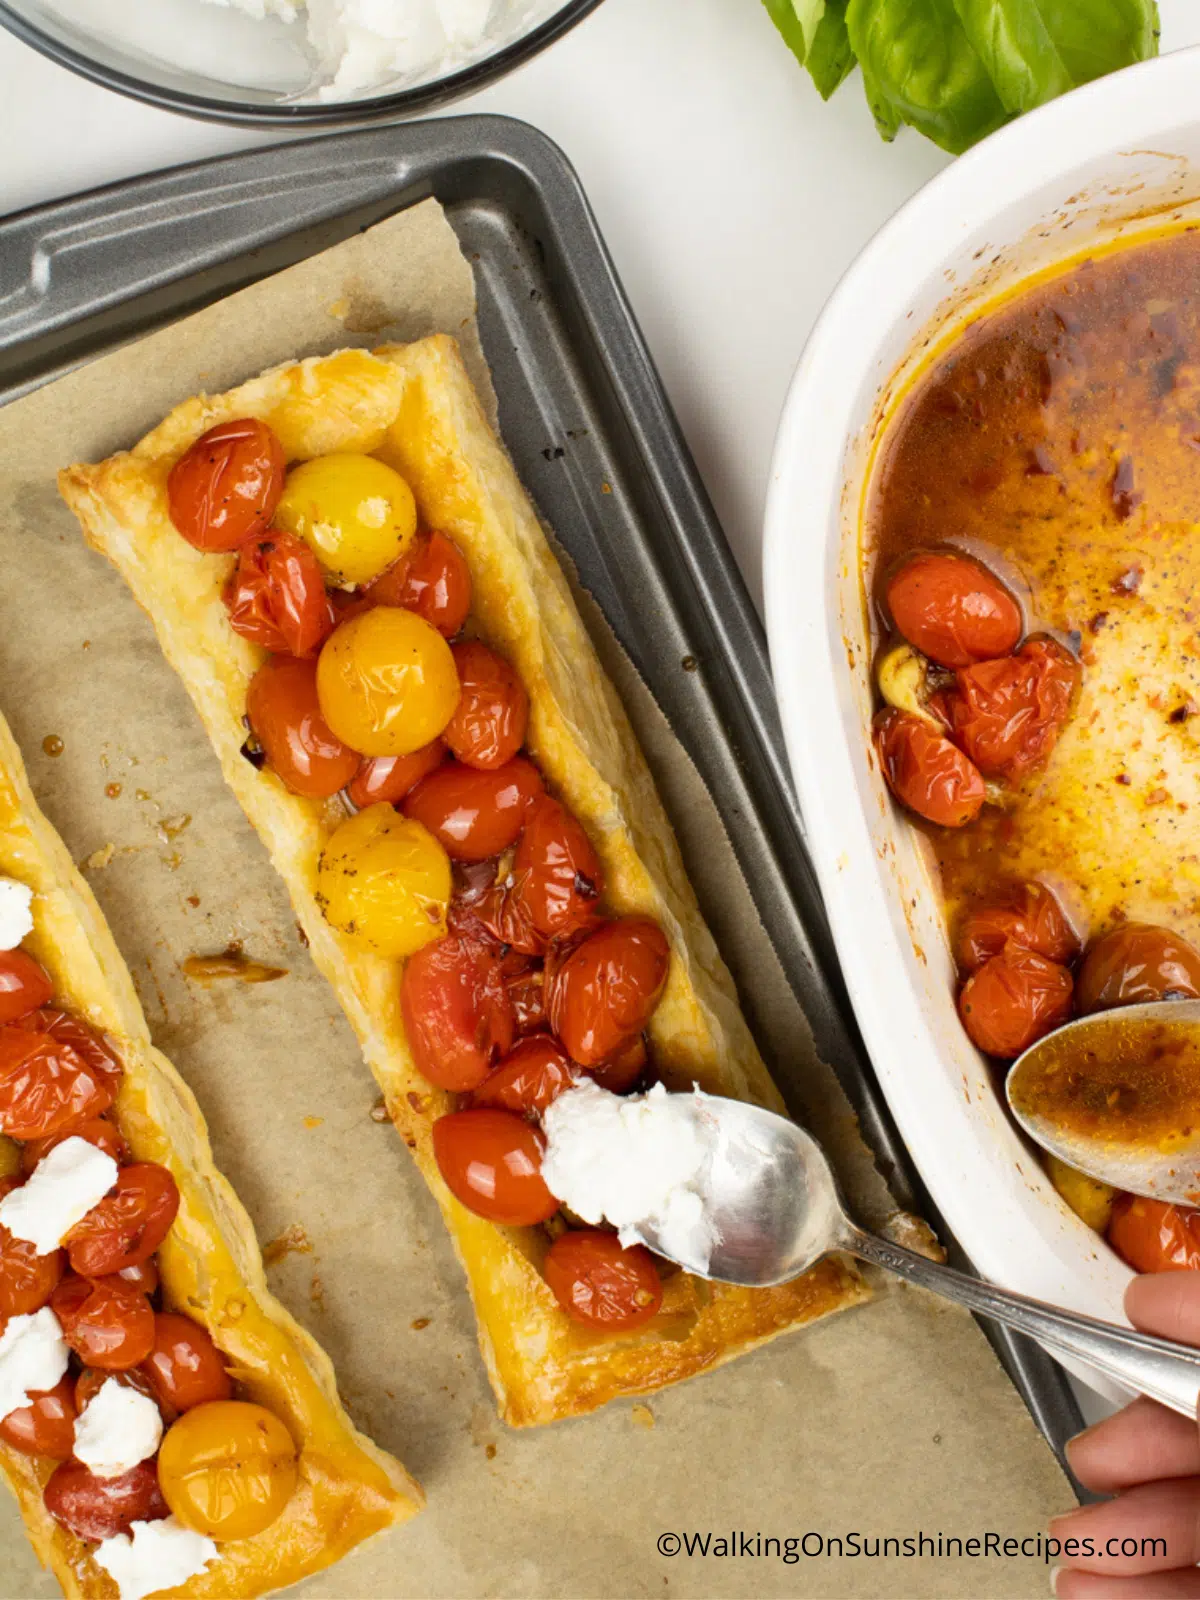 Add cheese to the tops of tomatoes and puff pastry.